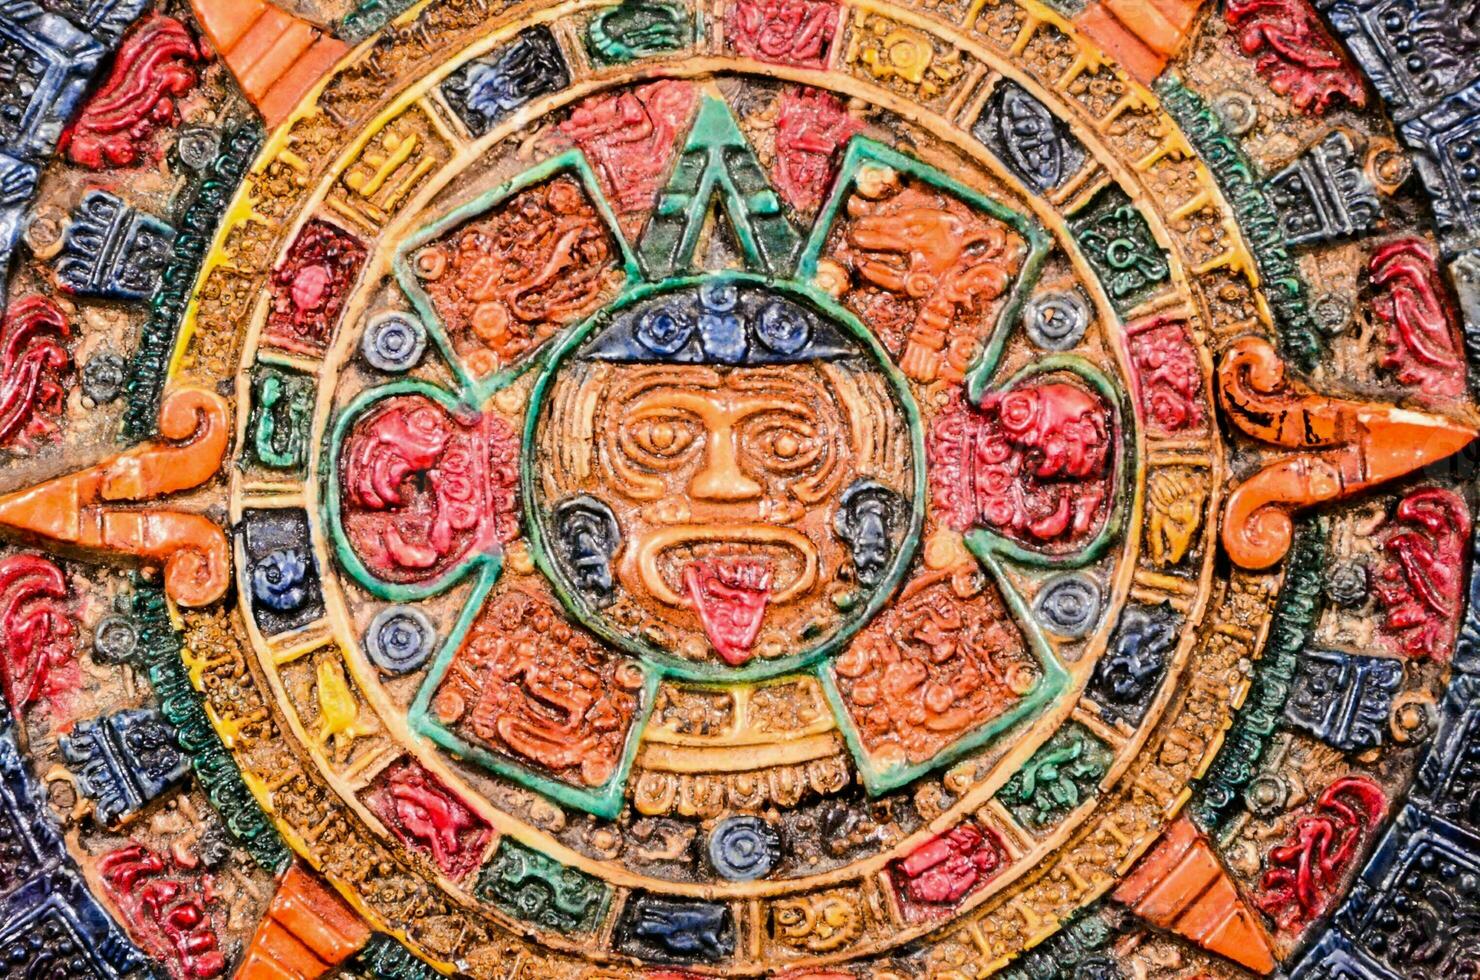 the mayan calendar is a colorful, decorative object photo